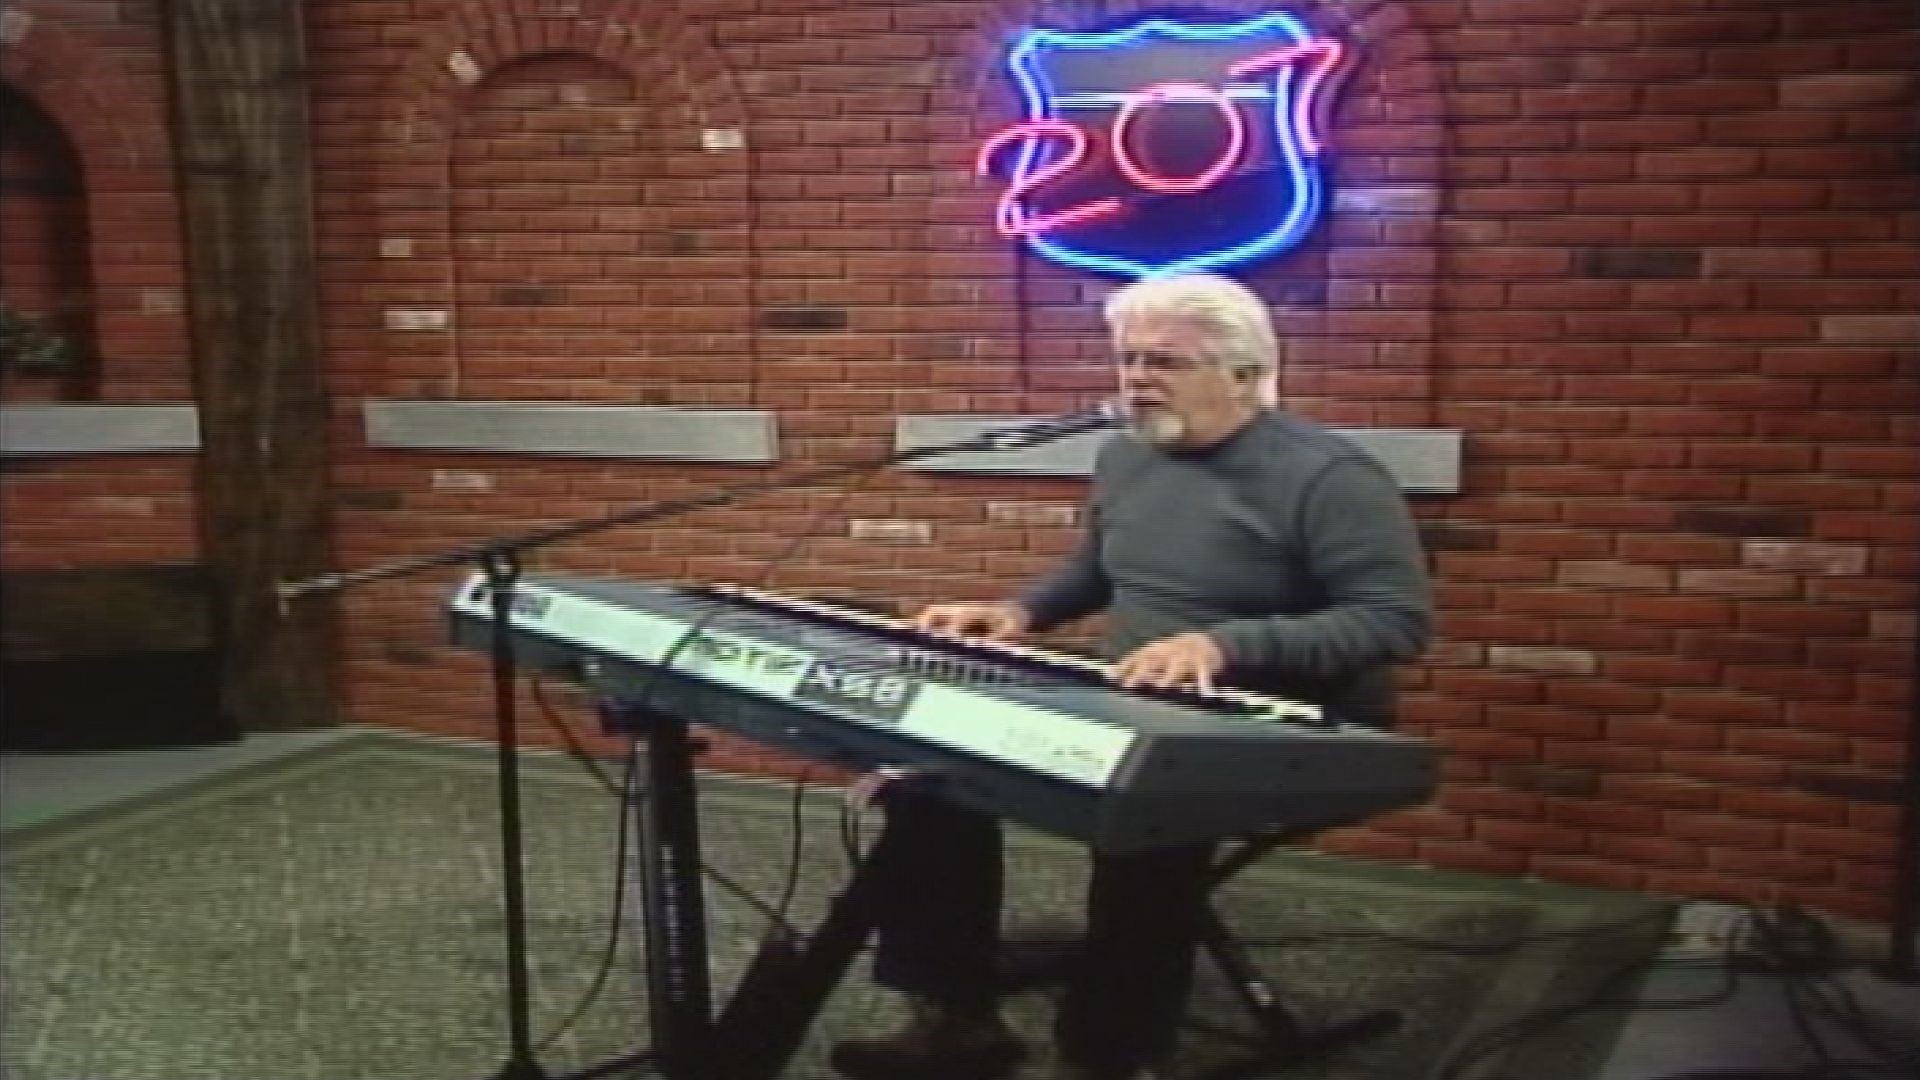 The microphones in the 207 Studio could barely handle a voice as powerful as Michael McDonald's for his performance of "Takin' It to the Streets" in January 2010.